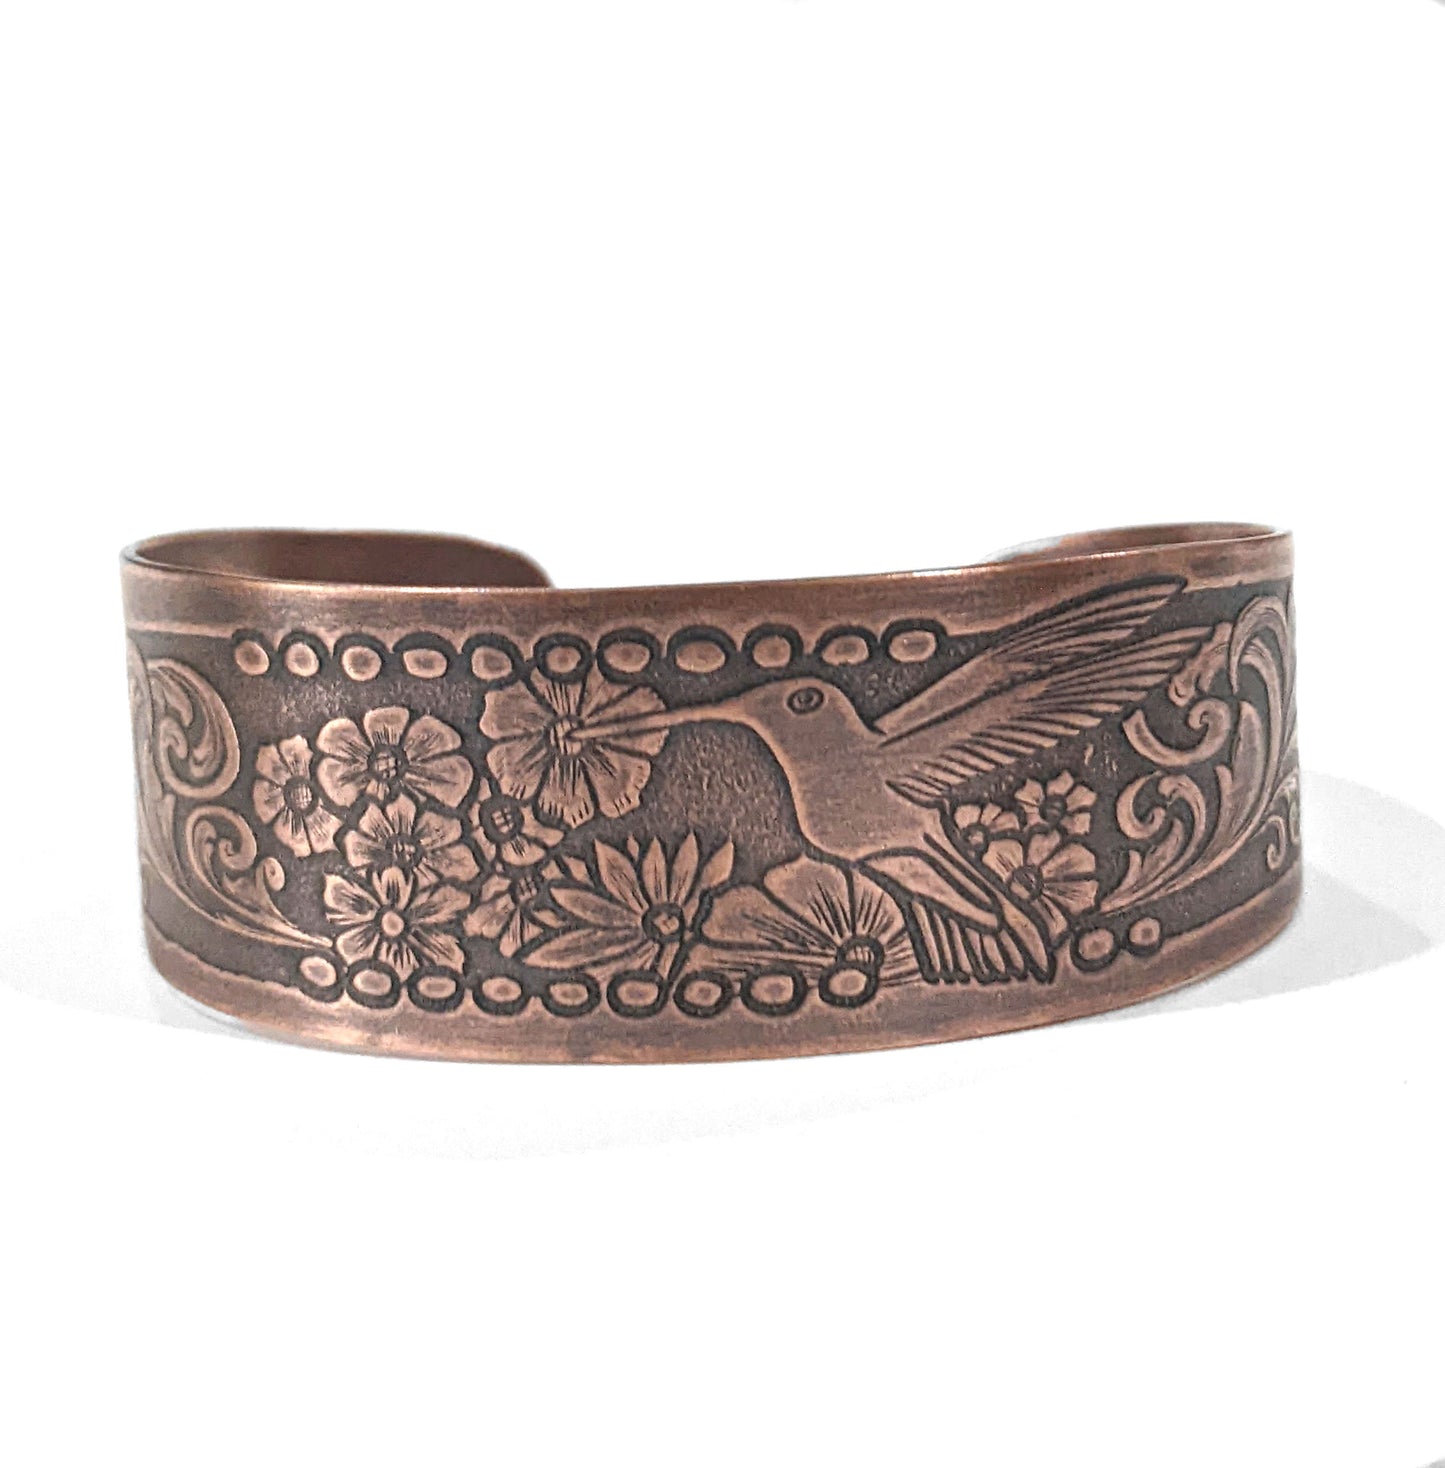 Copper cuff bracelet with hummingbirds and flowers. The main scene is a hummingbird in flight drinking nectar from one of a field of flowers. At each end of the cuff there is a smaller hummingbird drinking from a single flower. The cuff is tapered, just under and inch wide at the center tapering to one half inch at the ends.